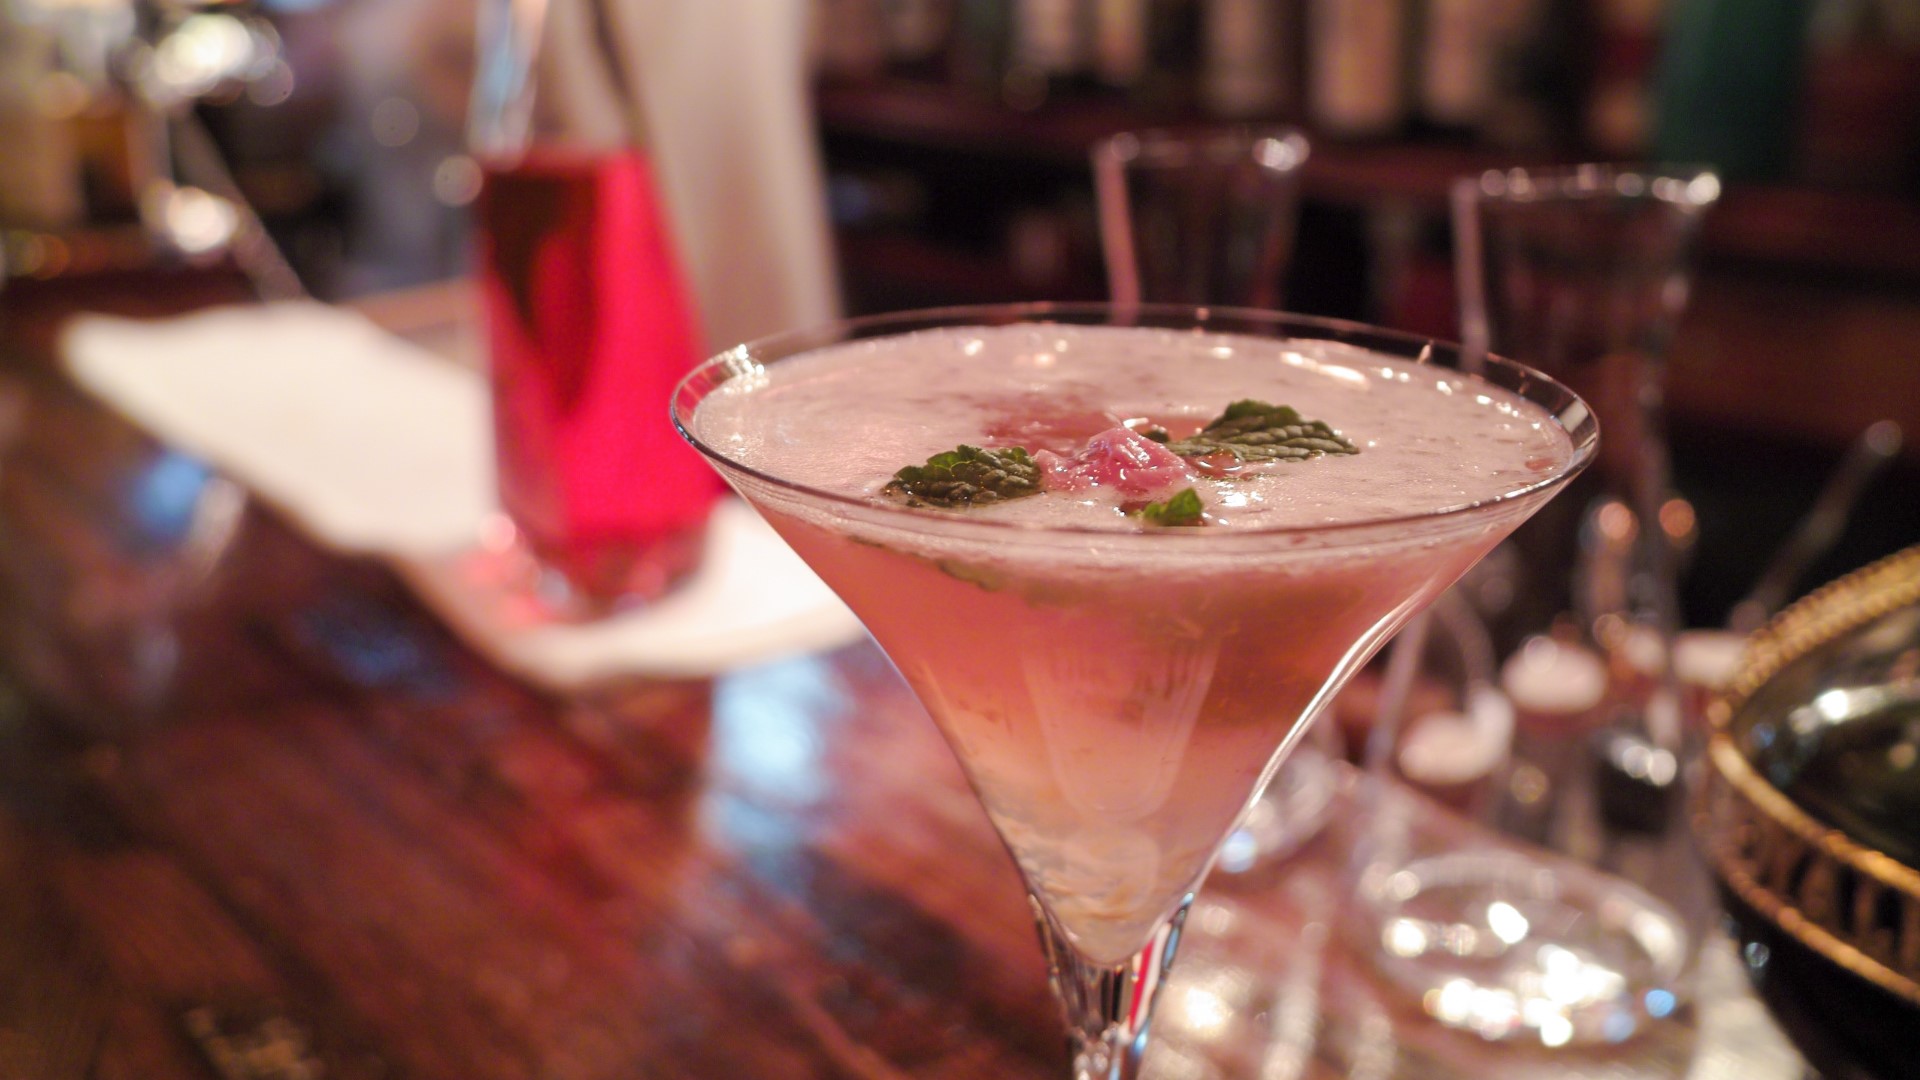 Restaurants around DC are celebrating cherry blossom season with themed food and drinks. Sarah Vanags of Osteria Morini shows how to make a cherry blossom cocktail.